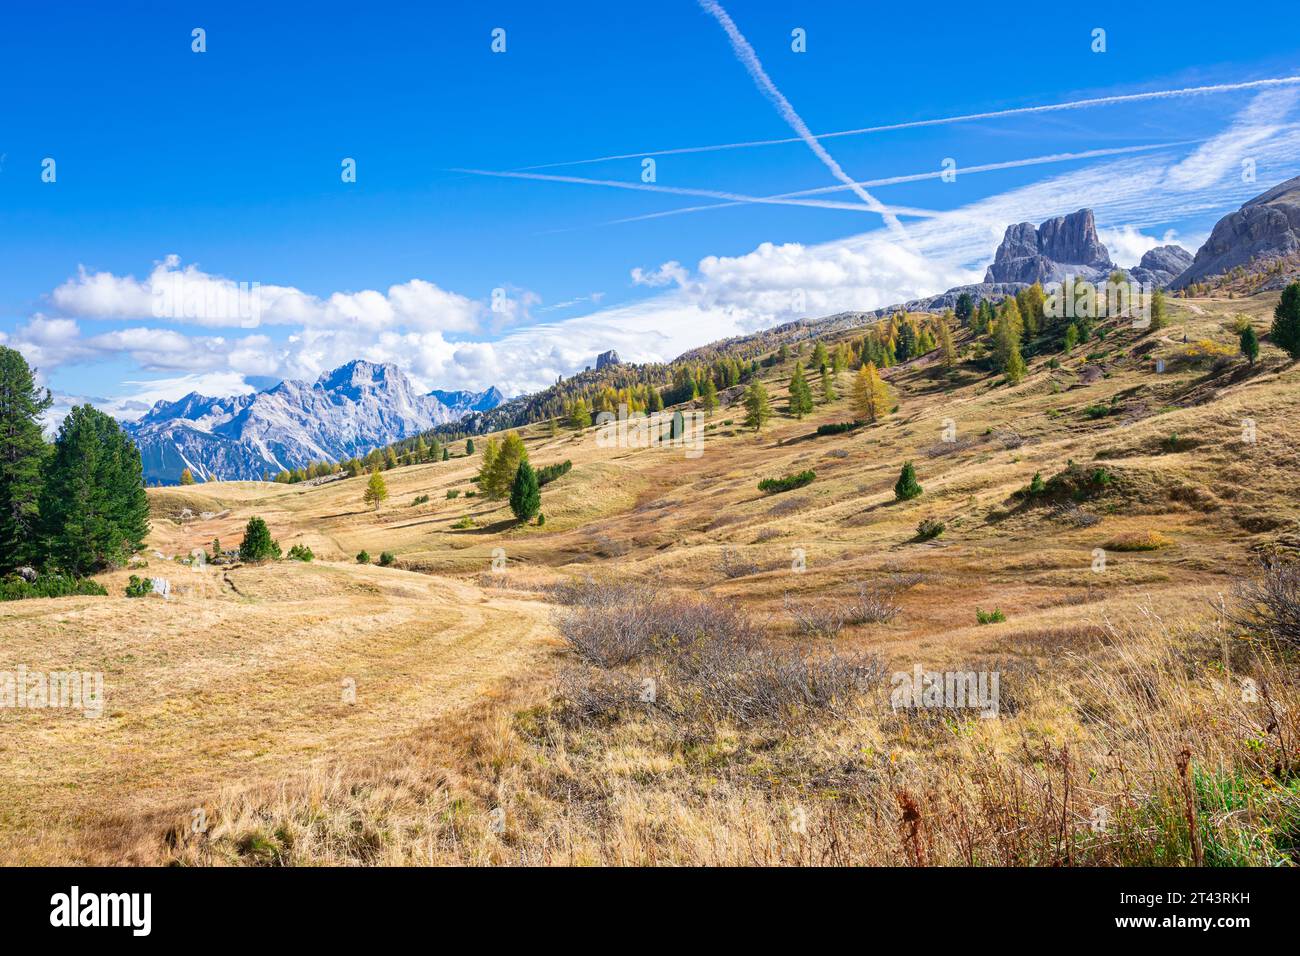 Idyllic view of an alpine meadow and mountains with larch trees in autumn colors in Ampezzo Dolomites Natural Park, Italy. Stock Photo